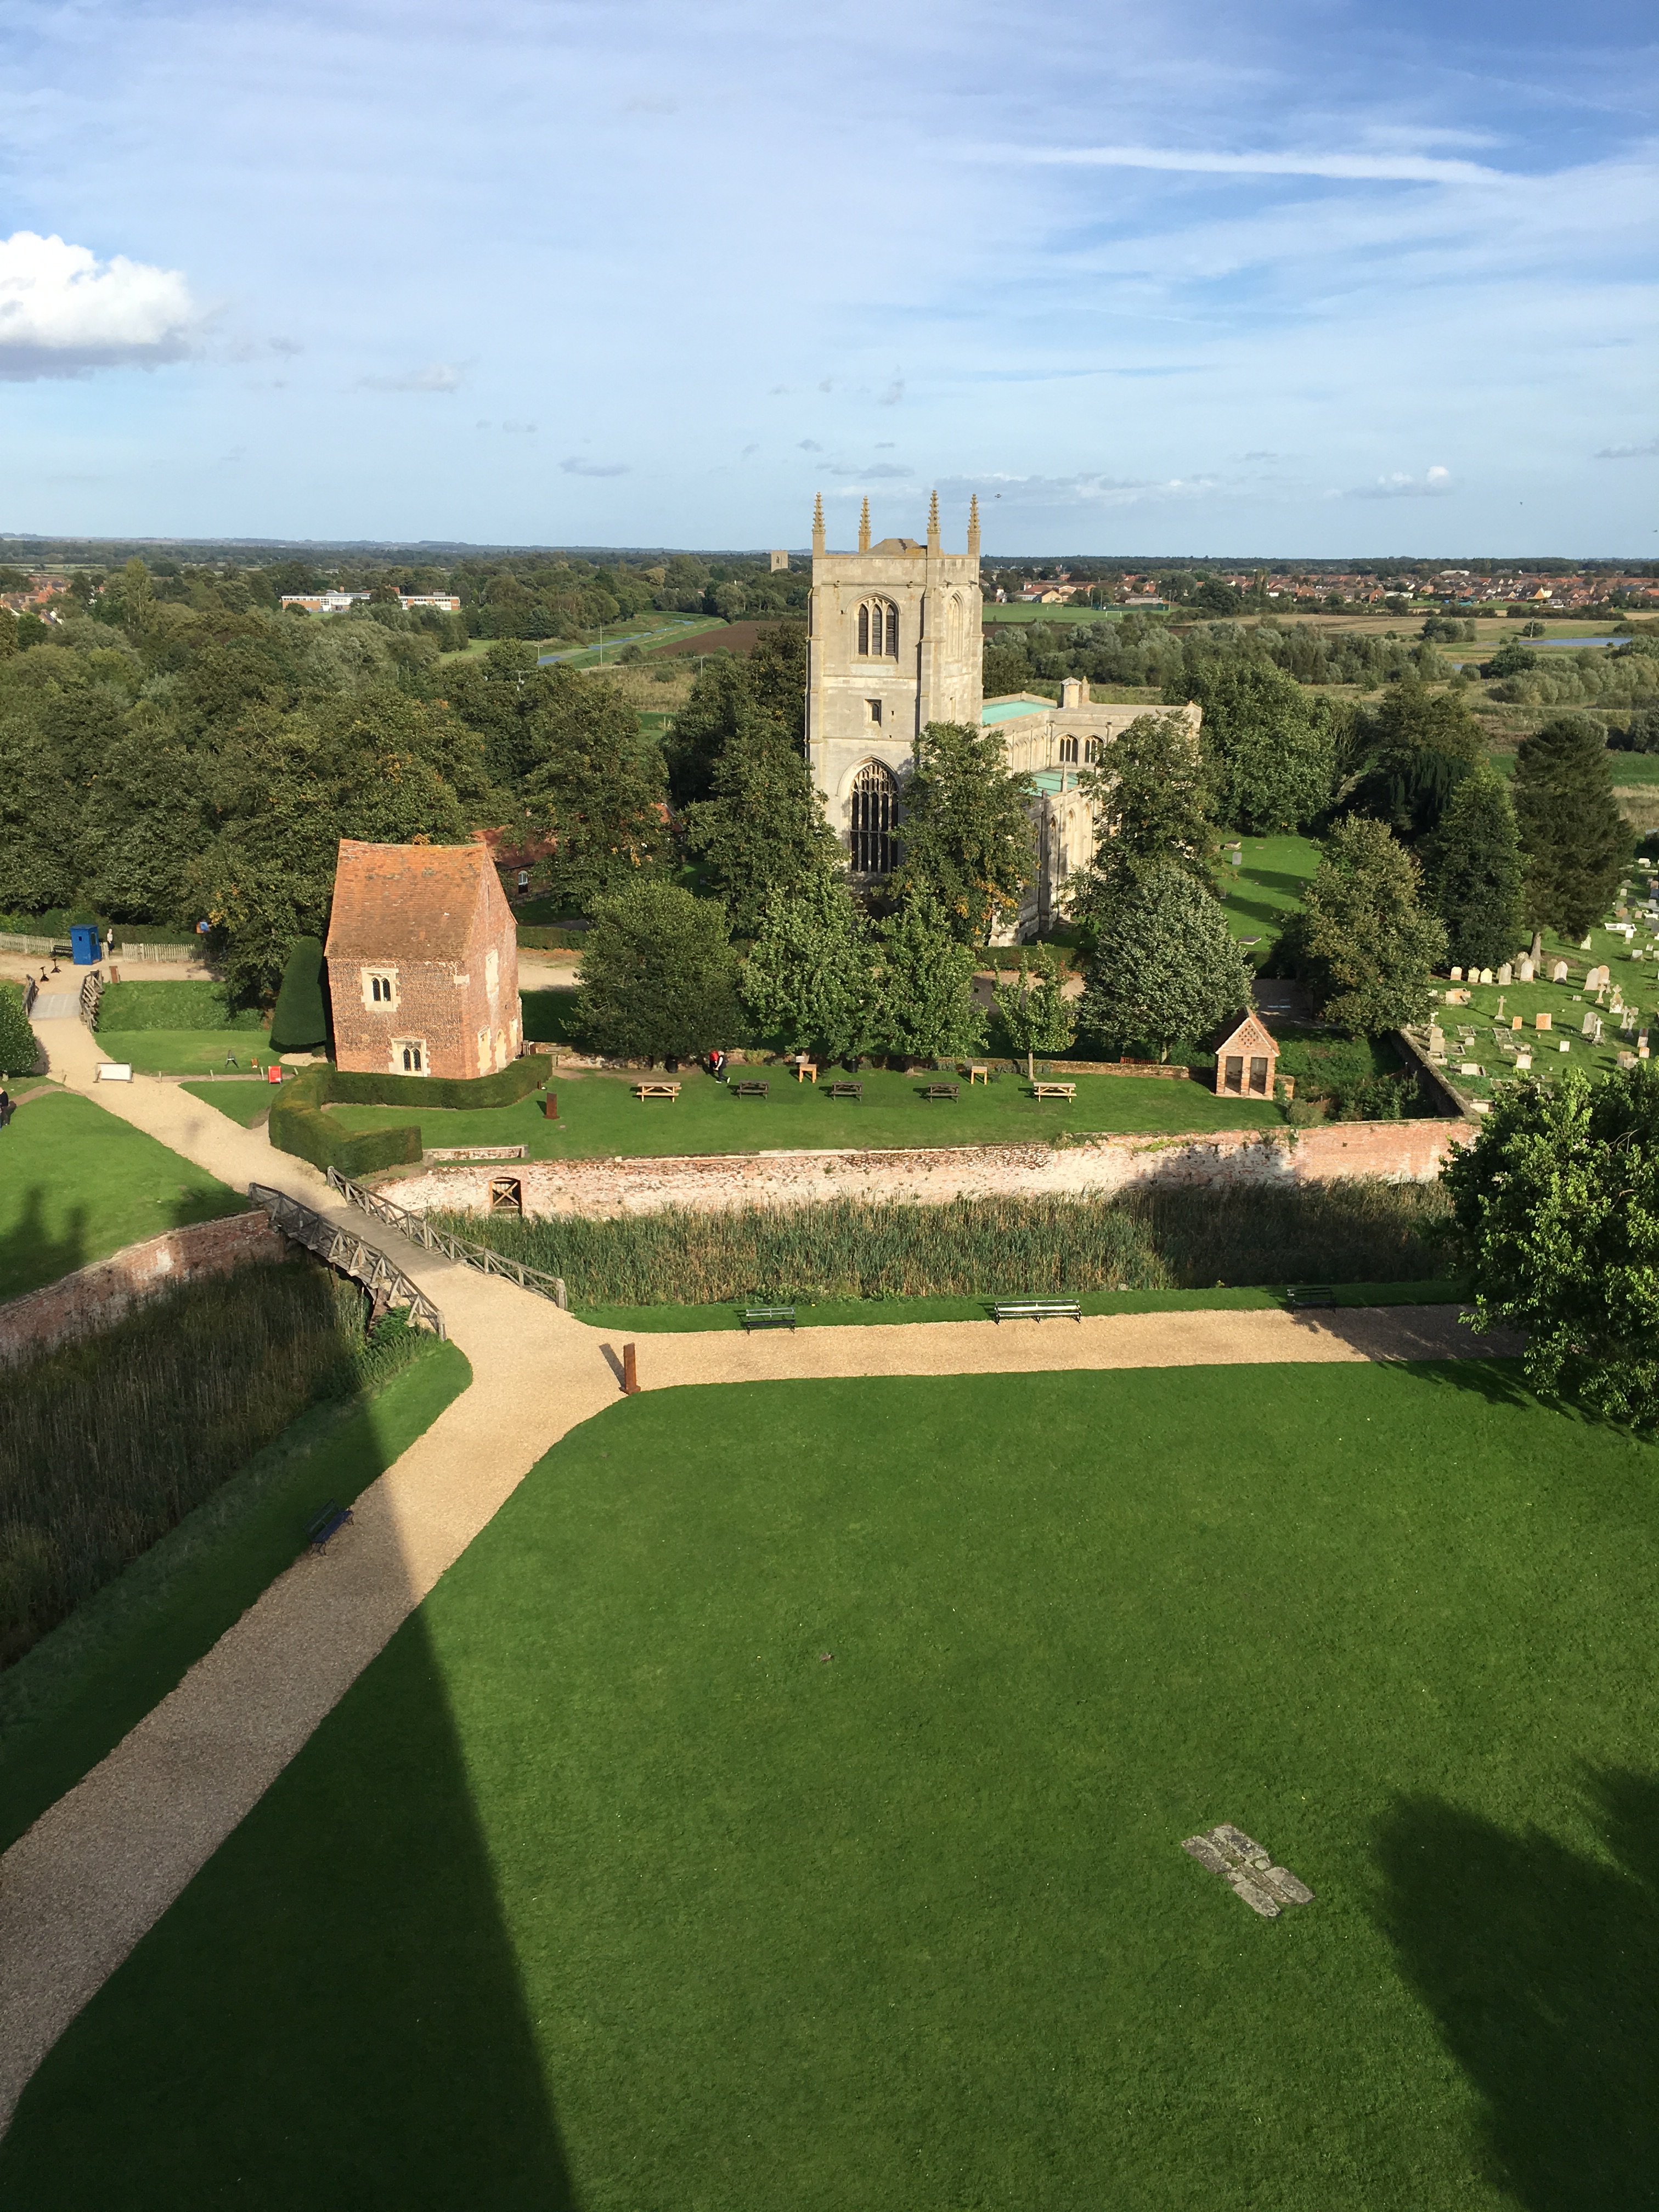 A View from the Tower of Tattershall Castle towards the old gatehouse